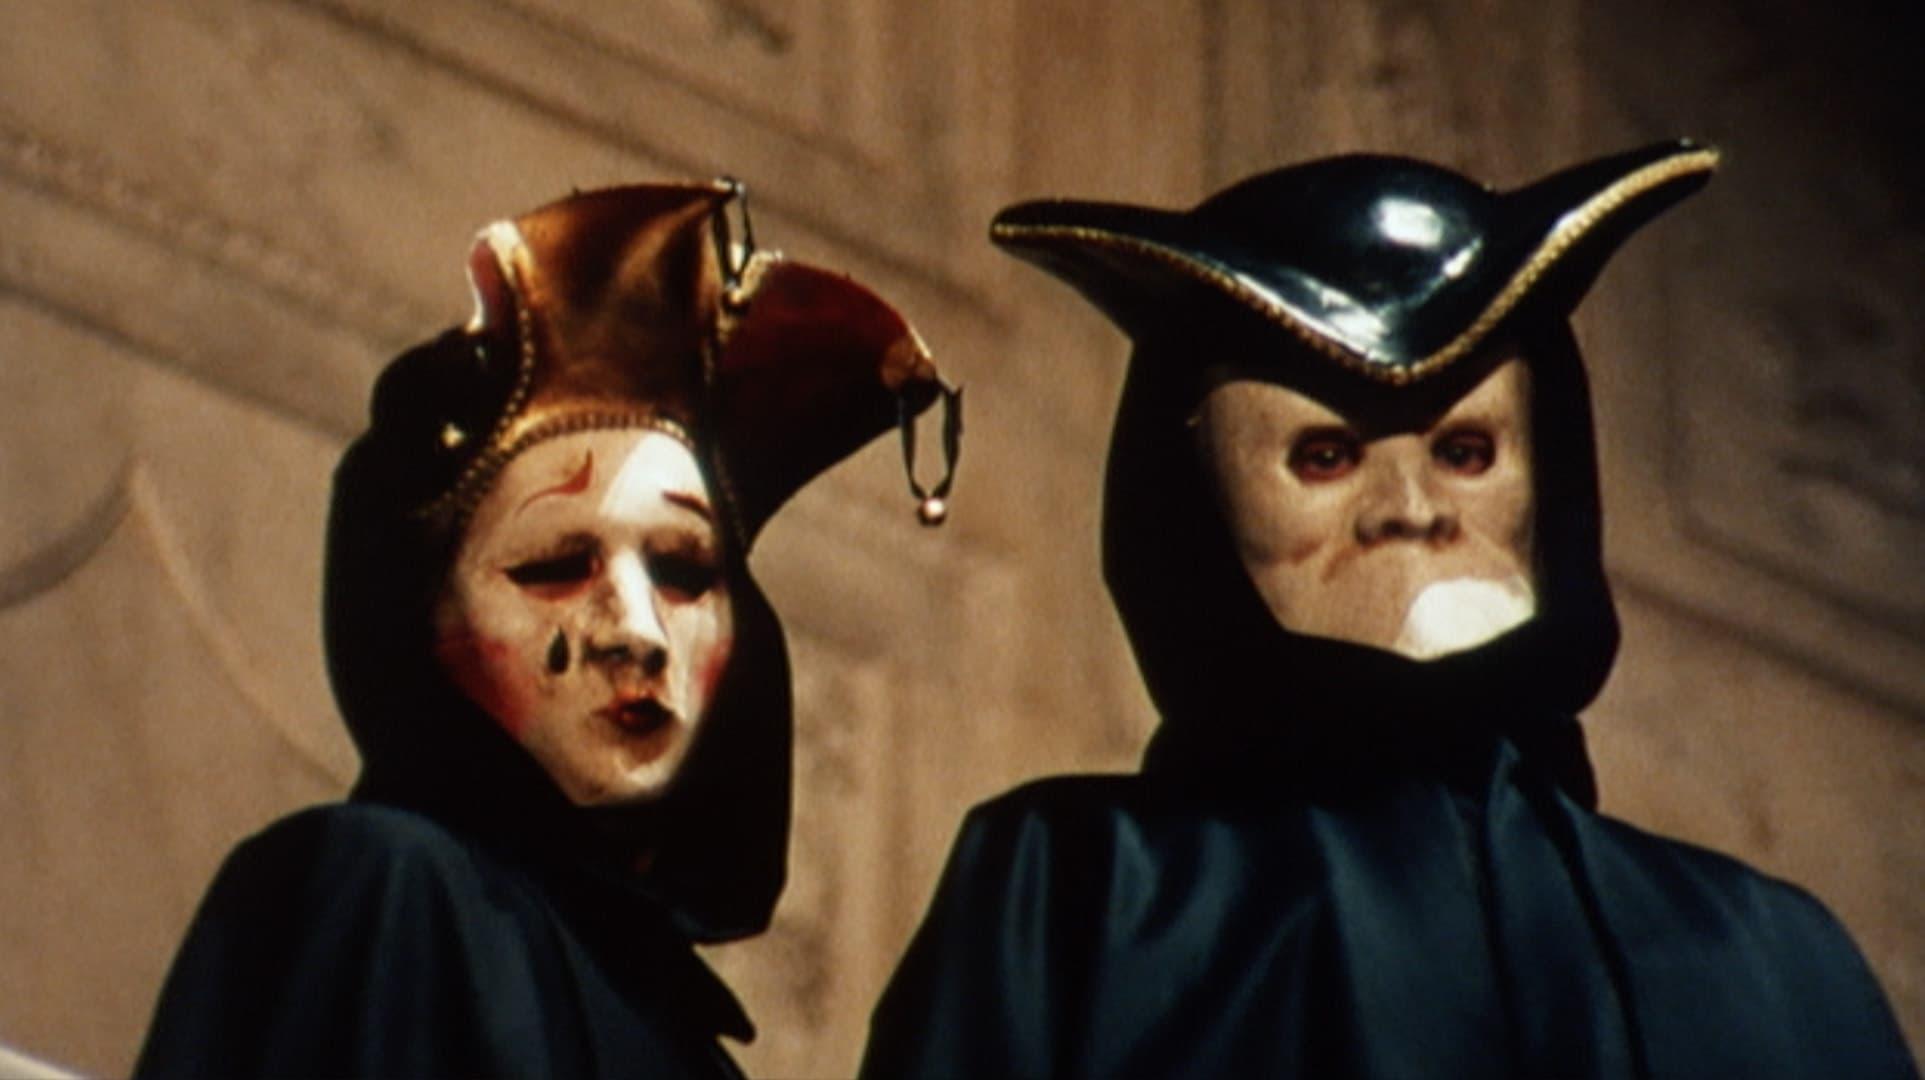 The Last Movie: Stanley Kubrick and 'Eyes Wide Shut' backdrop